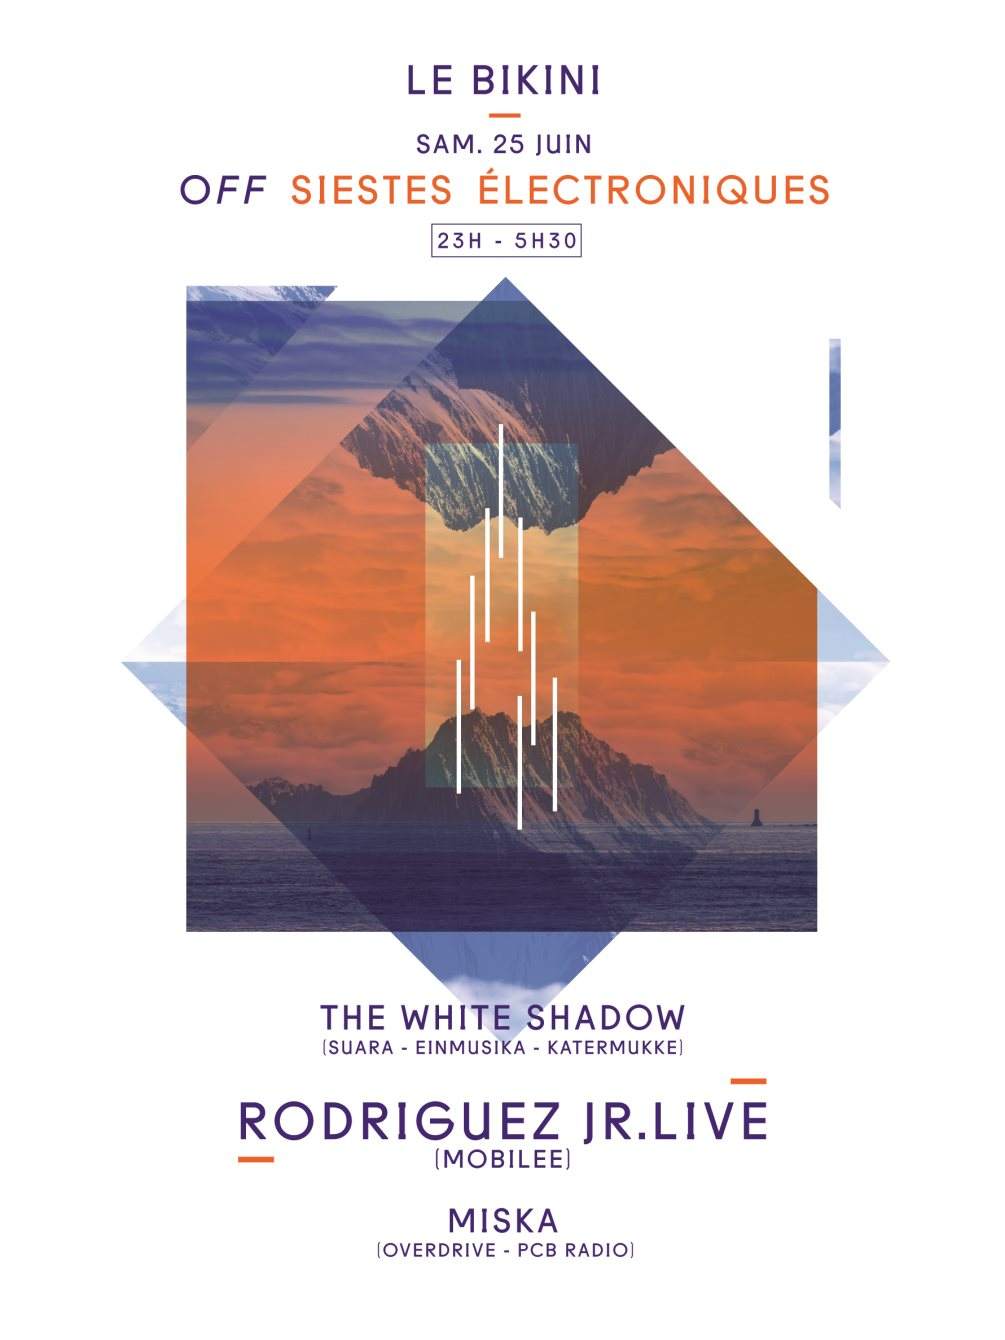 Off Siestes Electroniques: Rodriguez Jr / the White Shadow / Miska - フライヤー表